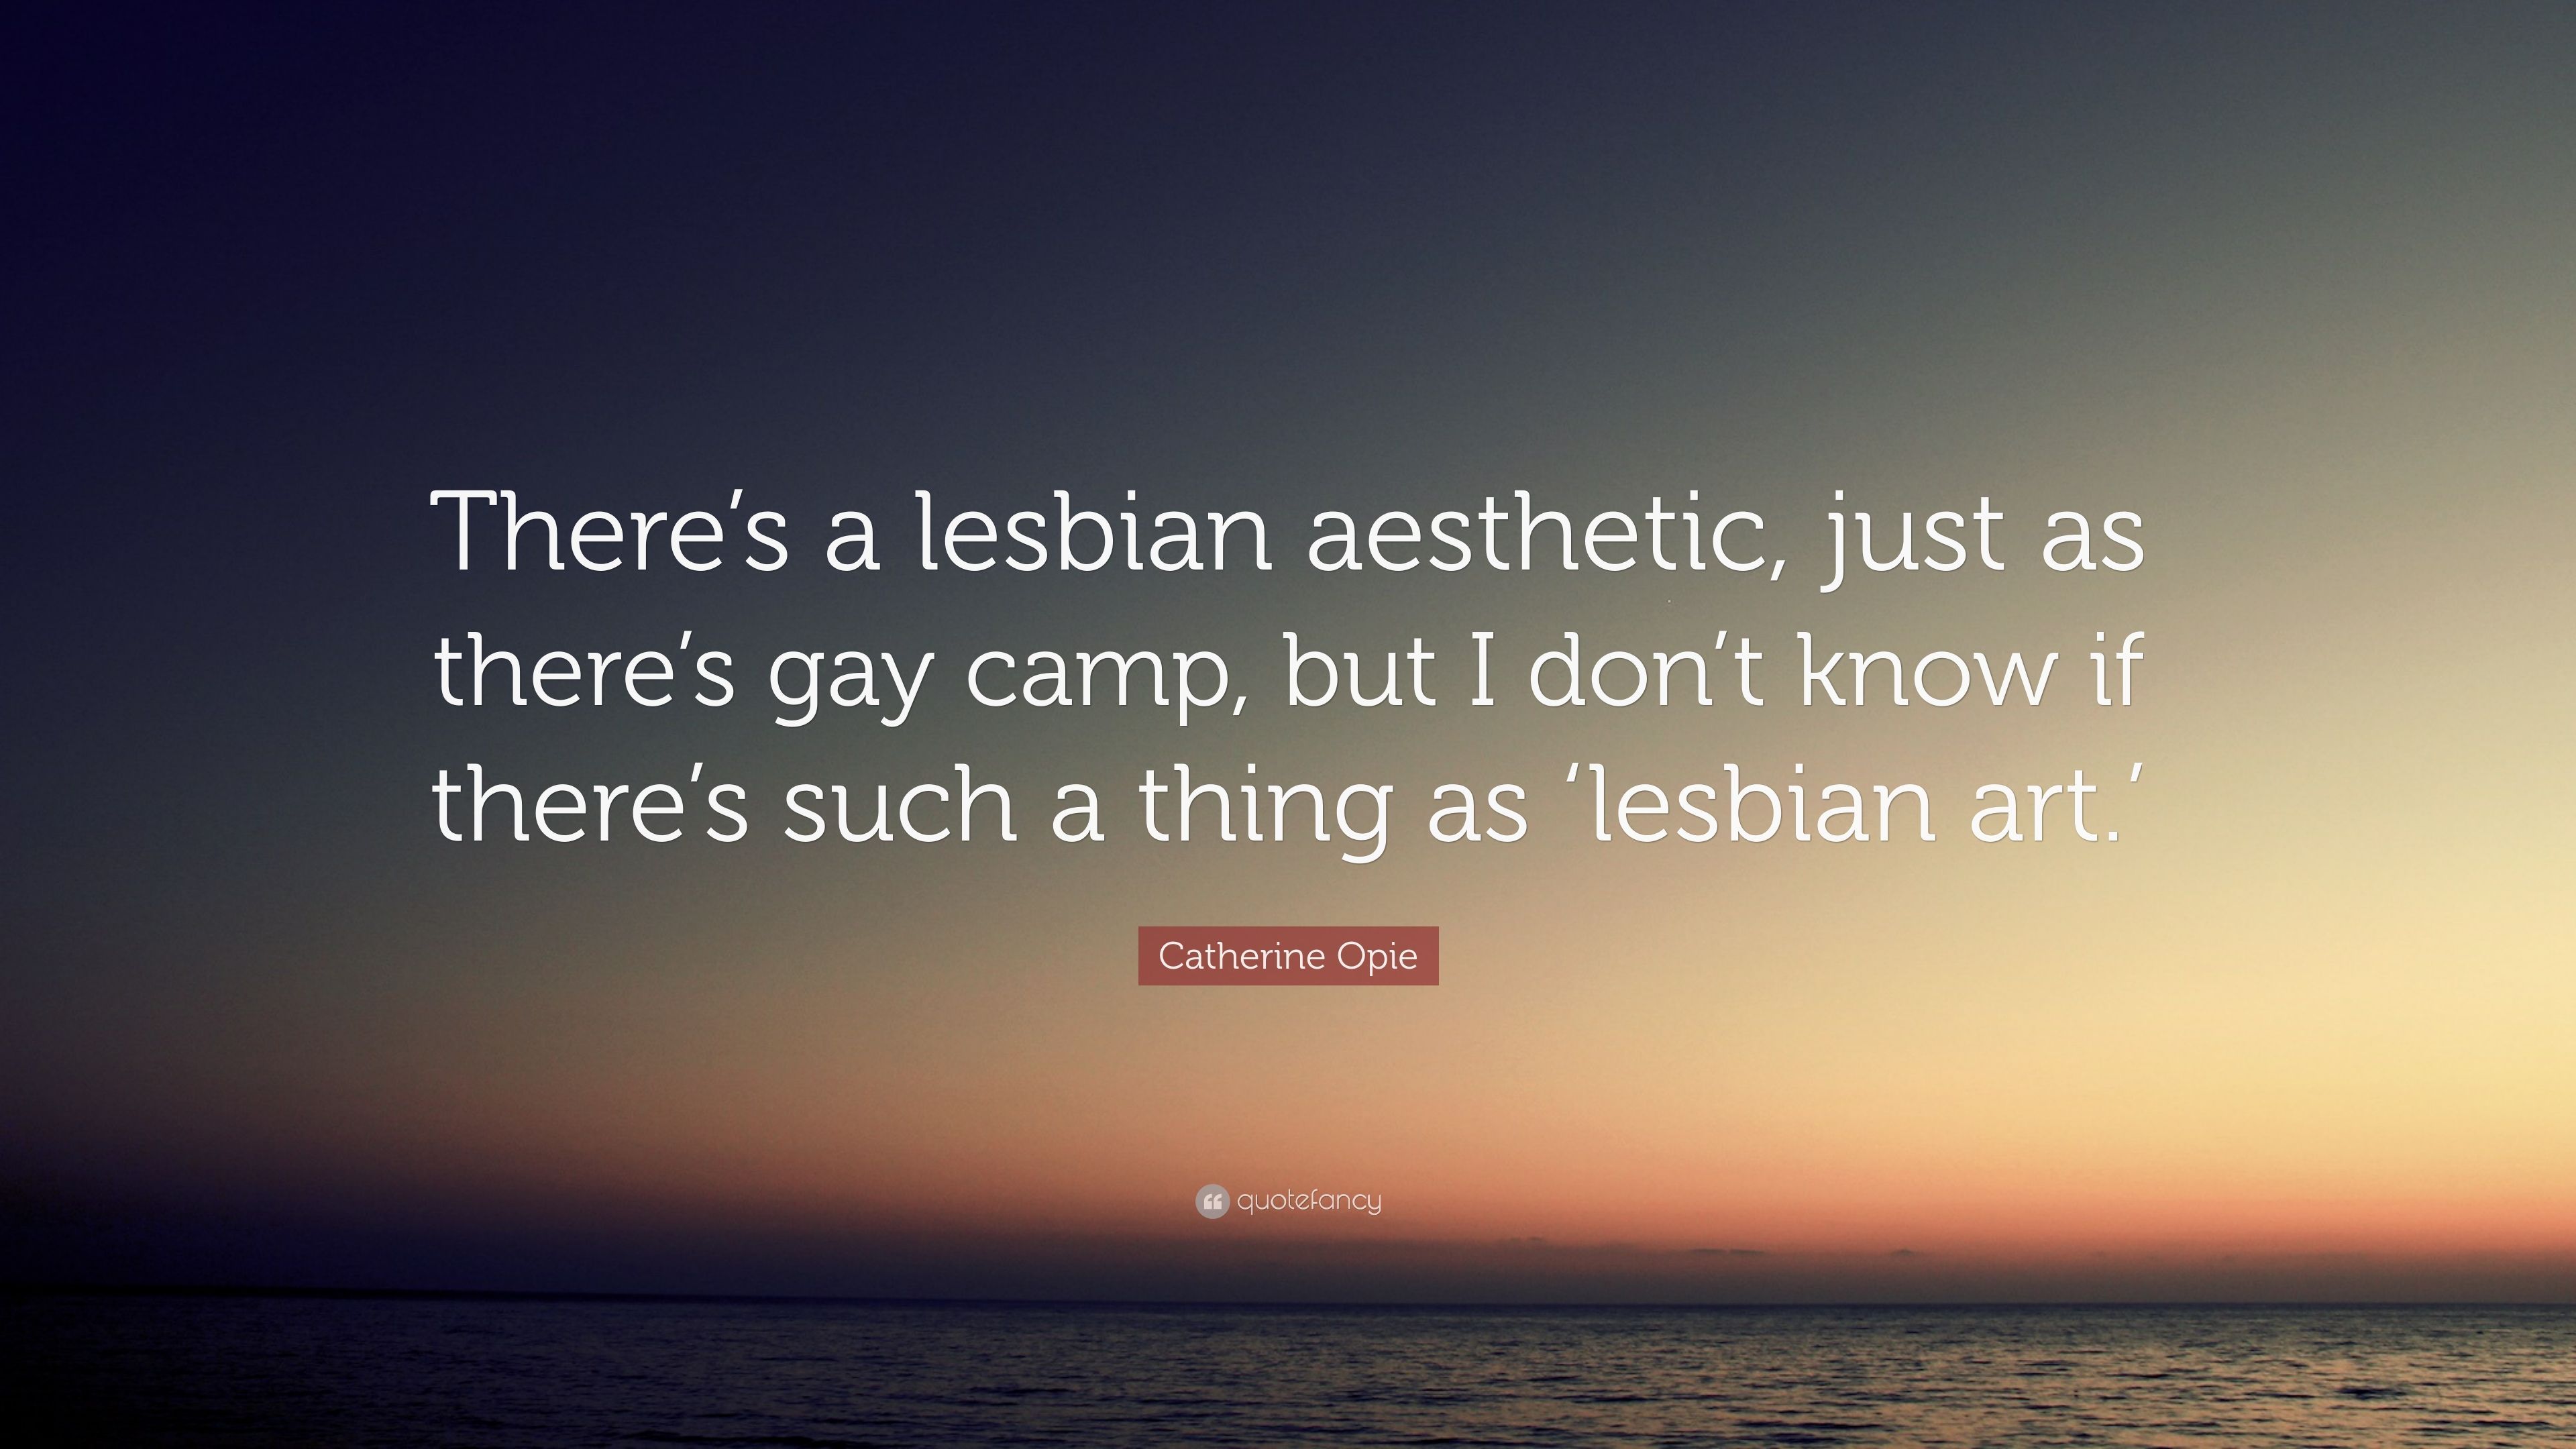 Catherine Opie Quote: “There's a lesbian aesthetic, just as there's gay camp, but I don't know if there's such a thing as 'lesbian art.'” (7 wallpaper)